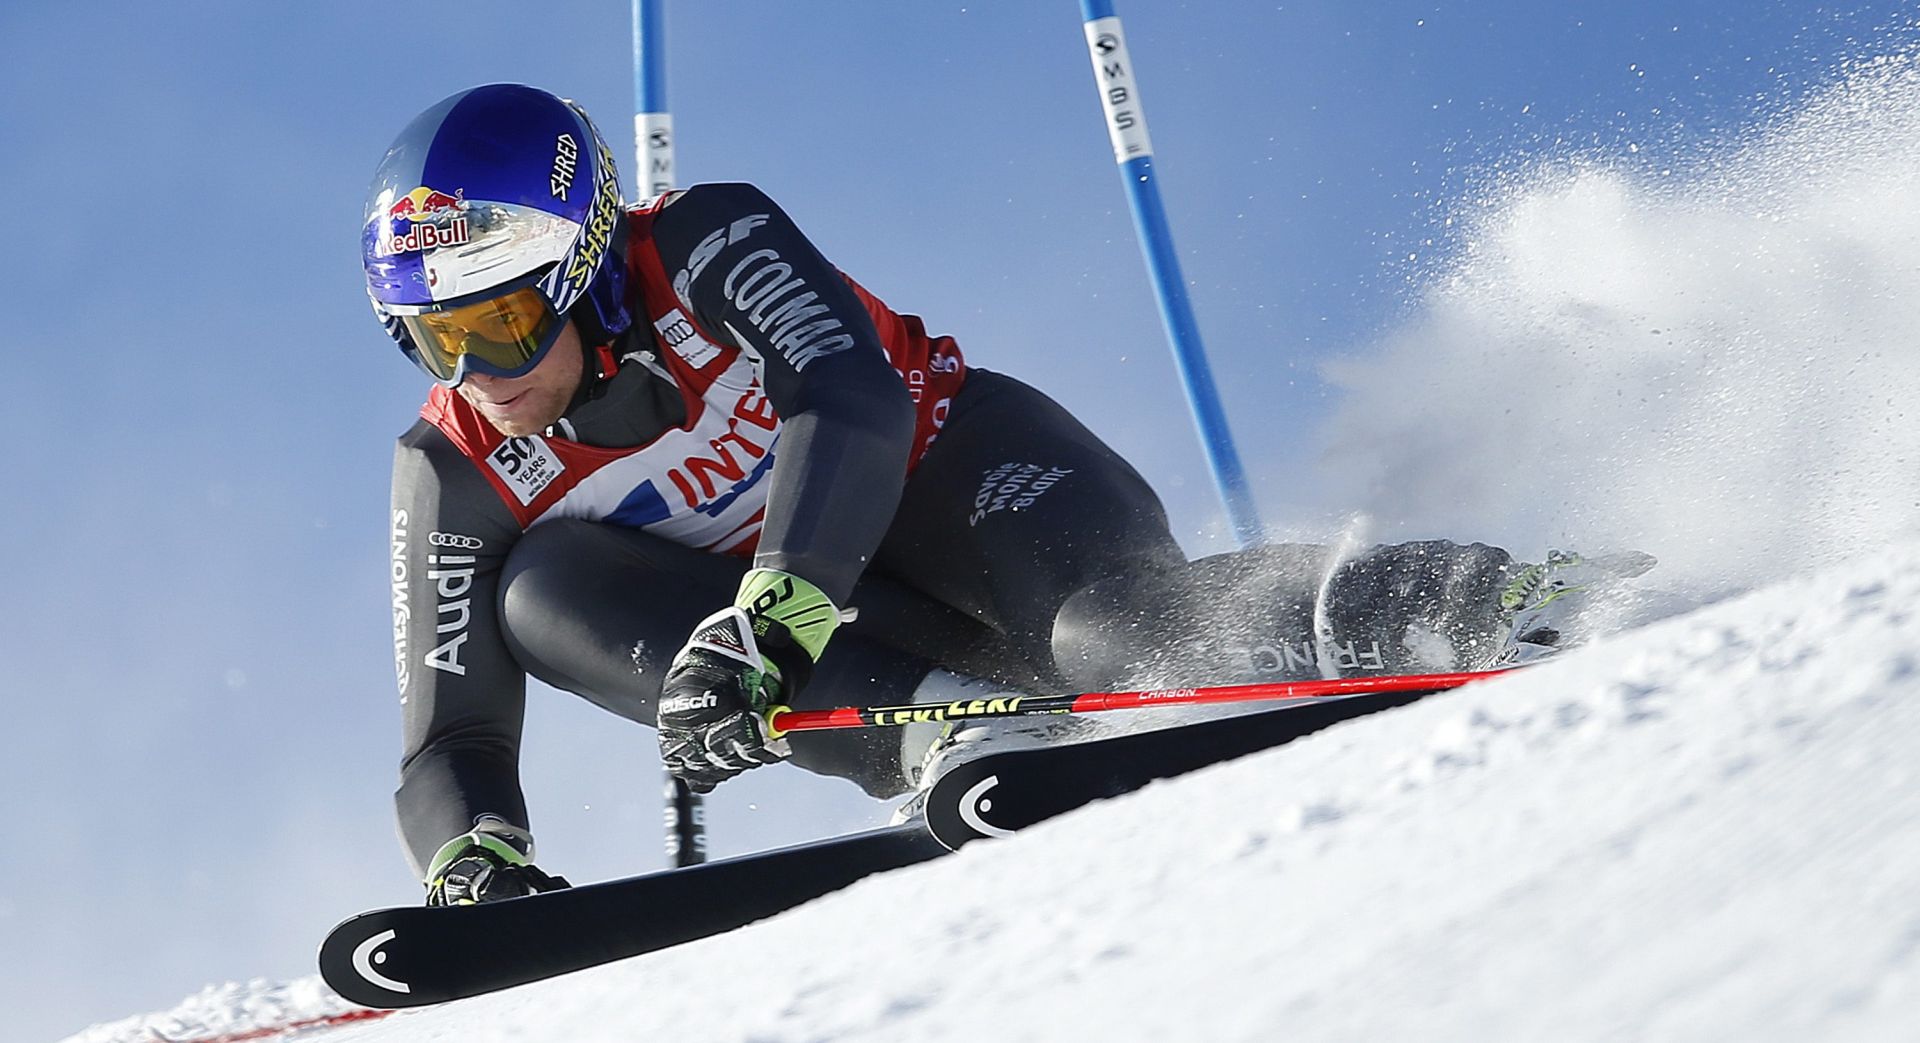 epa05668508 Alexis Pinturault of France in action during the first run of the men's Giant Slalom race at the FIS Alpine Skiing World Cup in Val D'Isere, France, 10 December 2016.  EPA/GUILLAUME HORCAJUELO